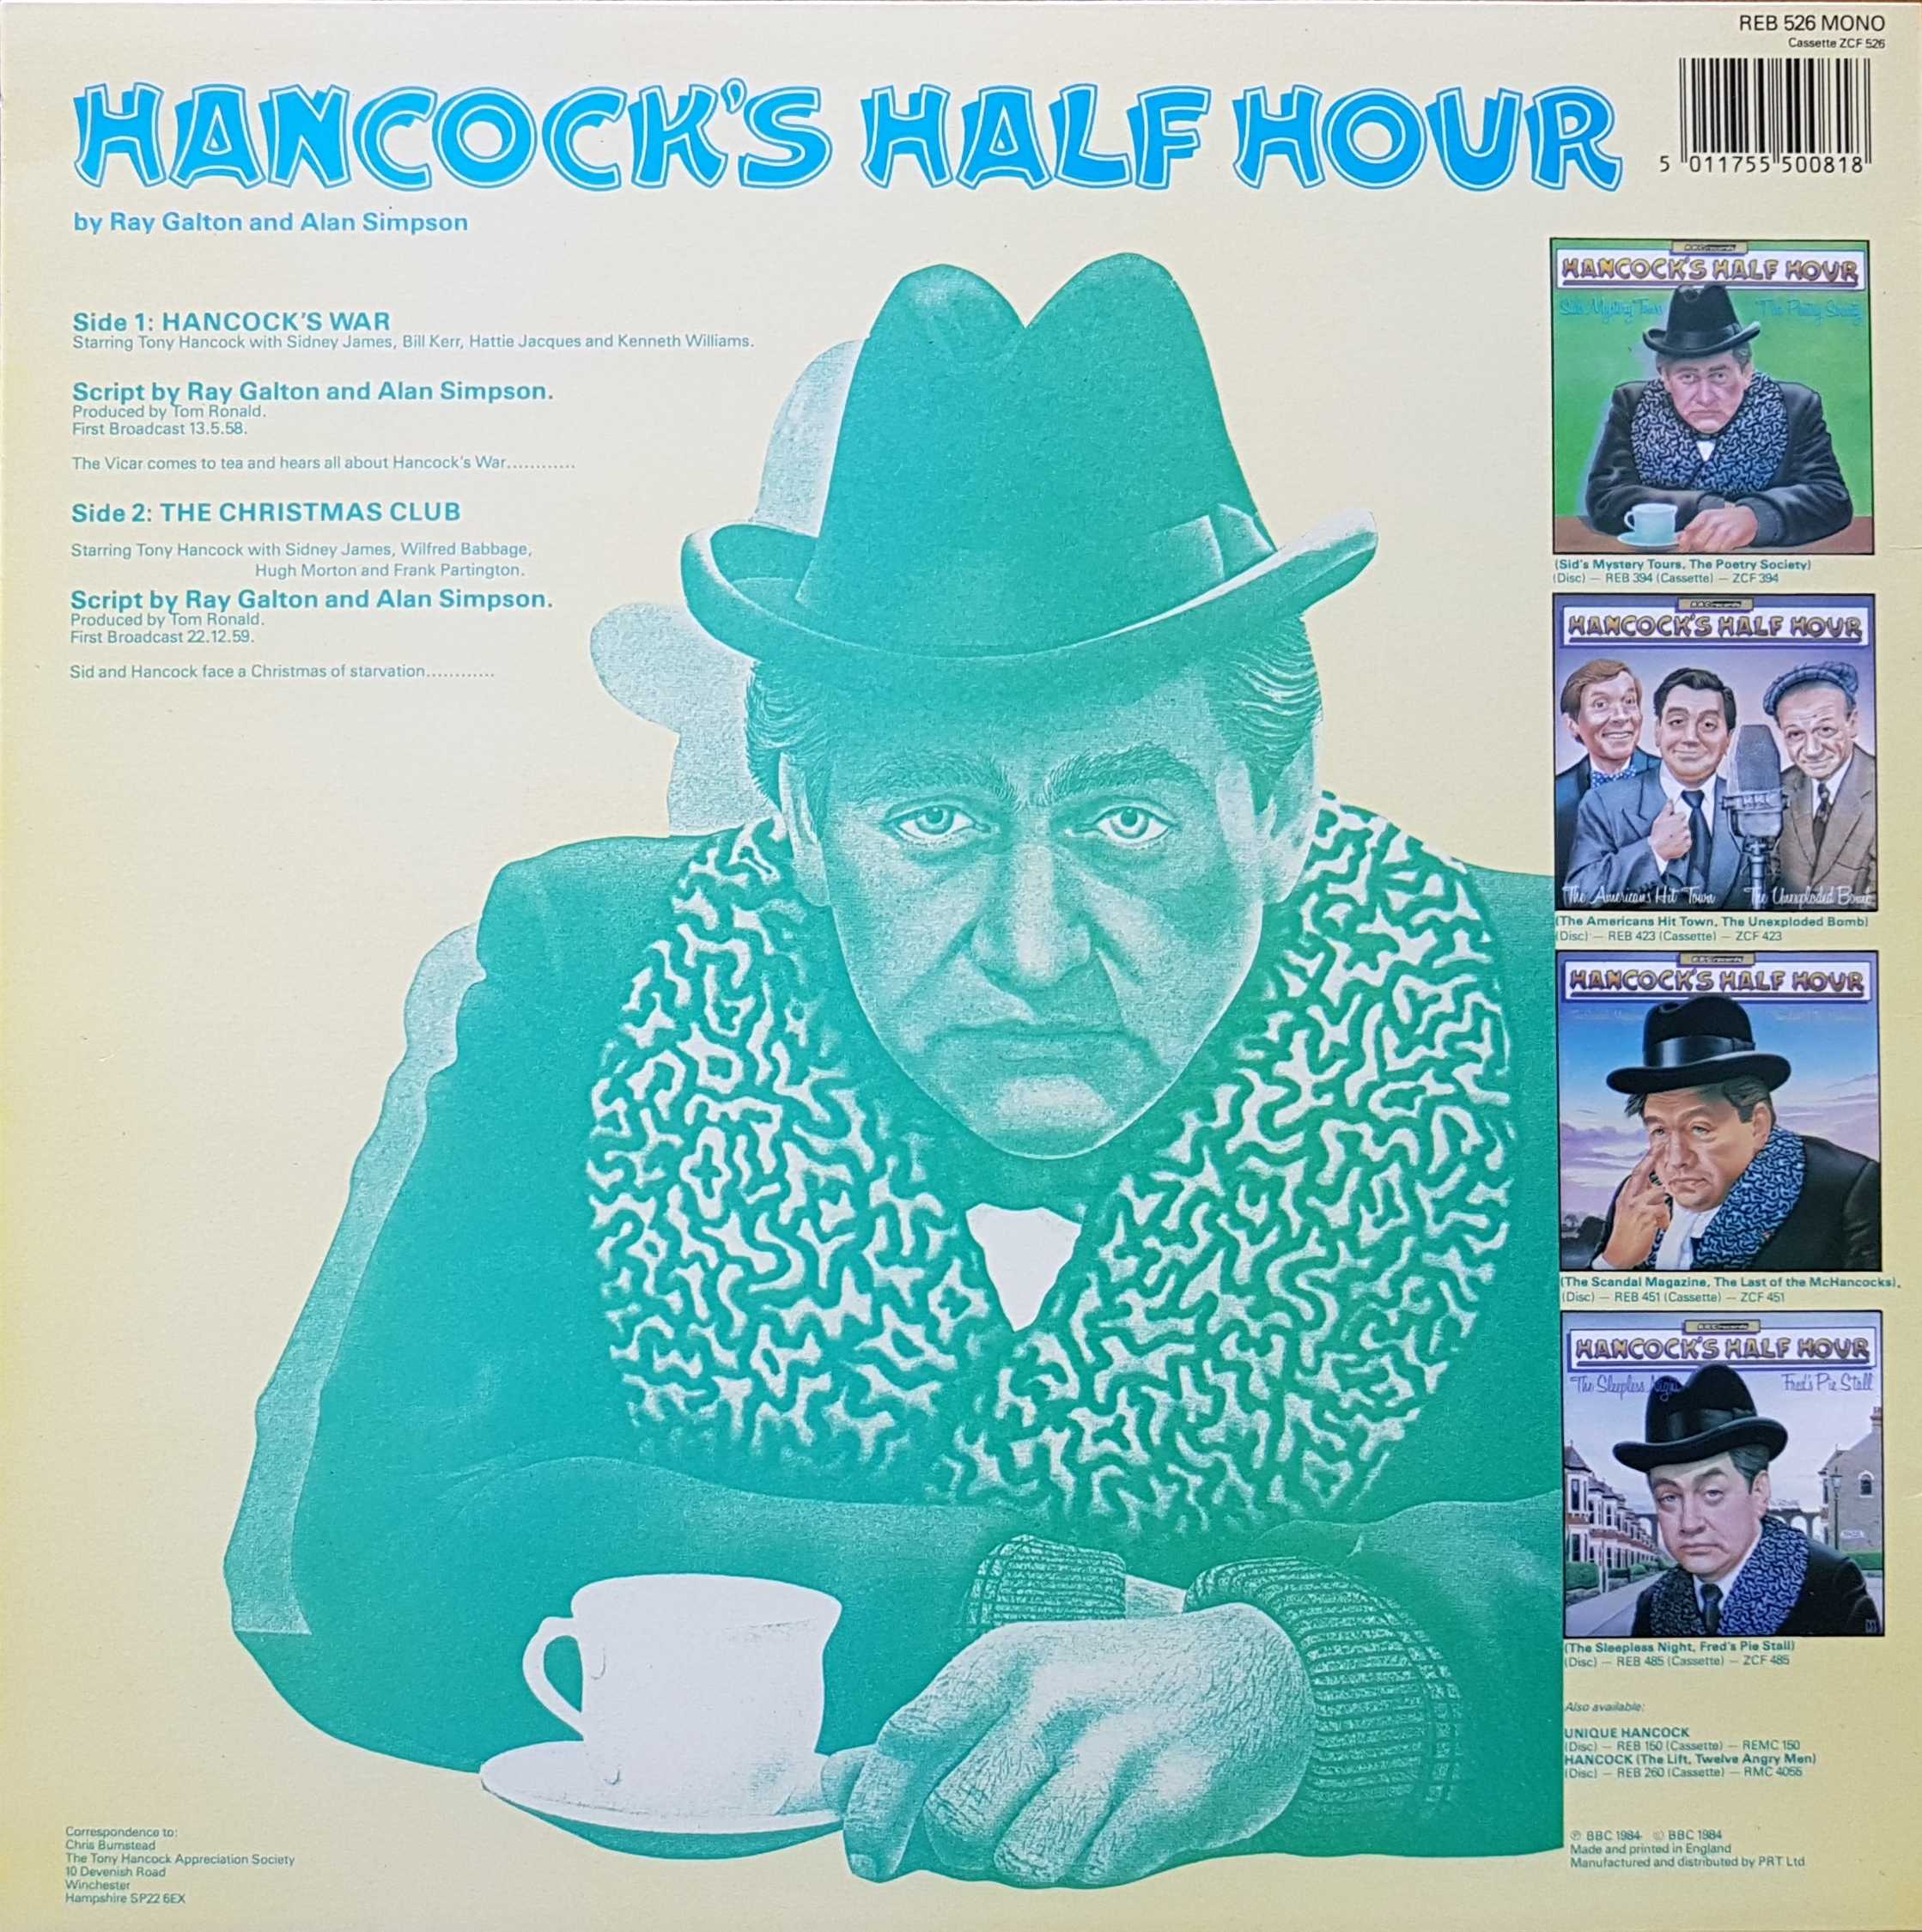 Picture of REB 526 Hancock's half hour - Volume 5 by artist Tony Hancock from the BBC records and Tapes library